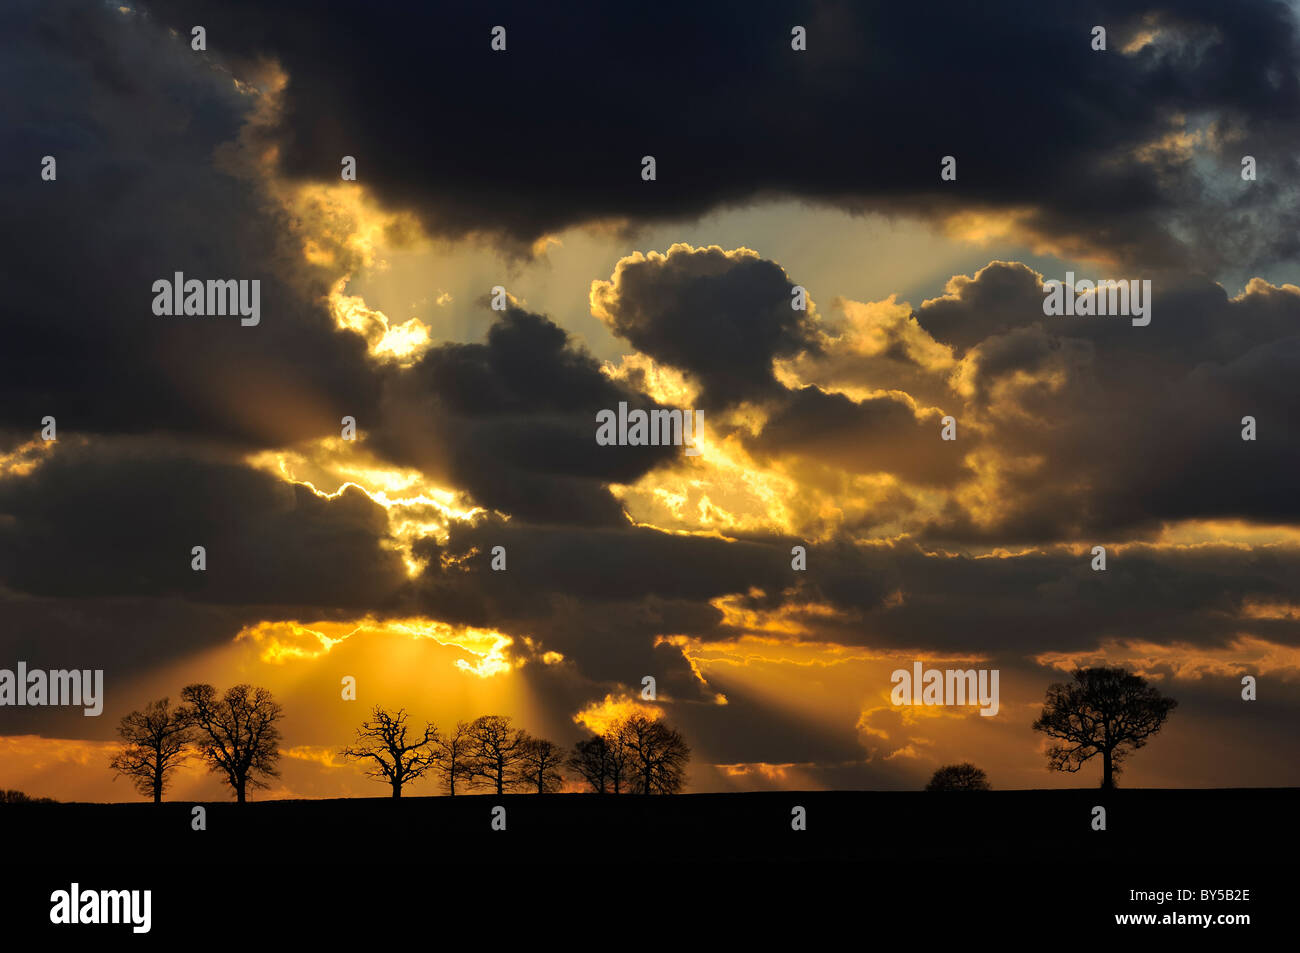 trees,group,winter,sunset,clouds,sun,silver,lining Stock Photo